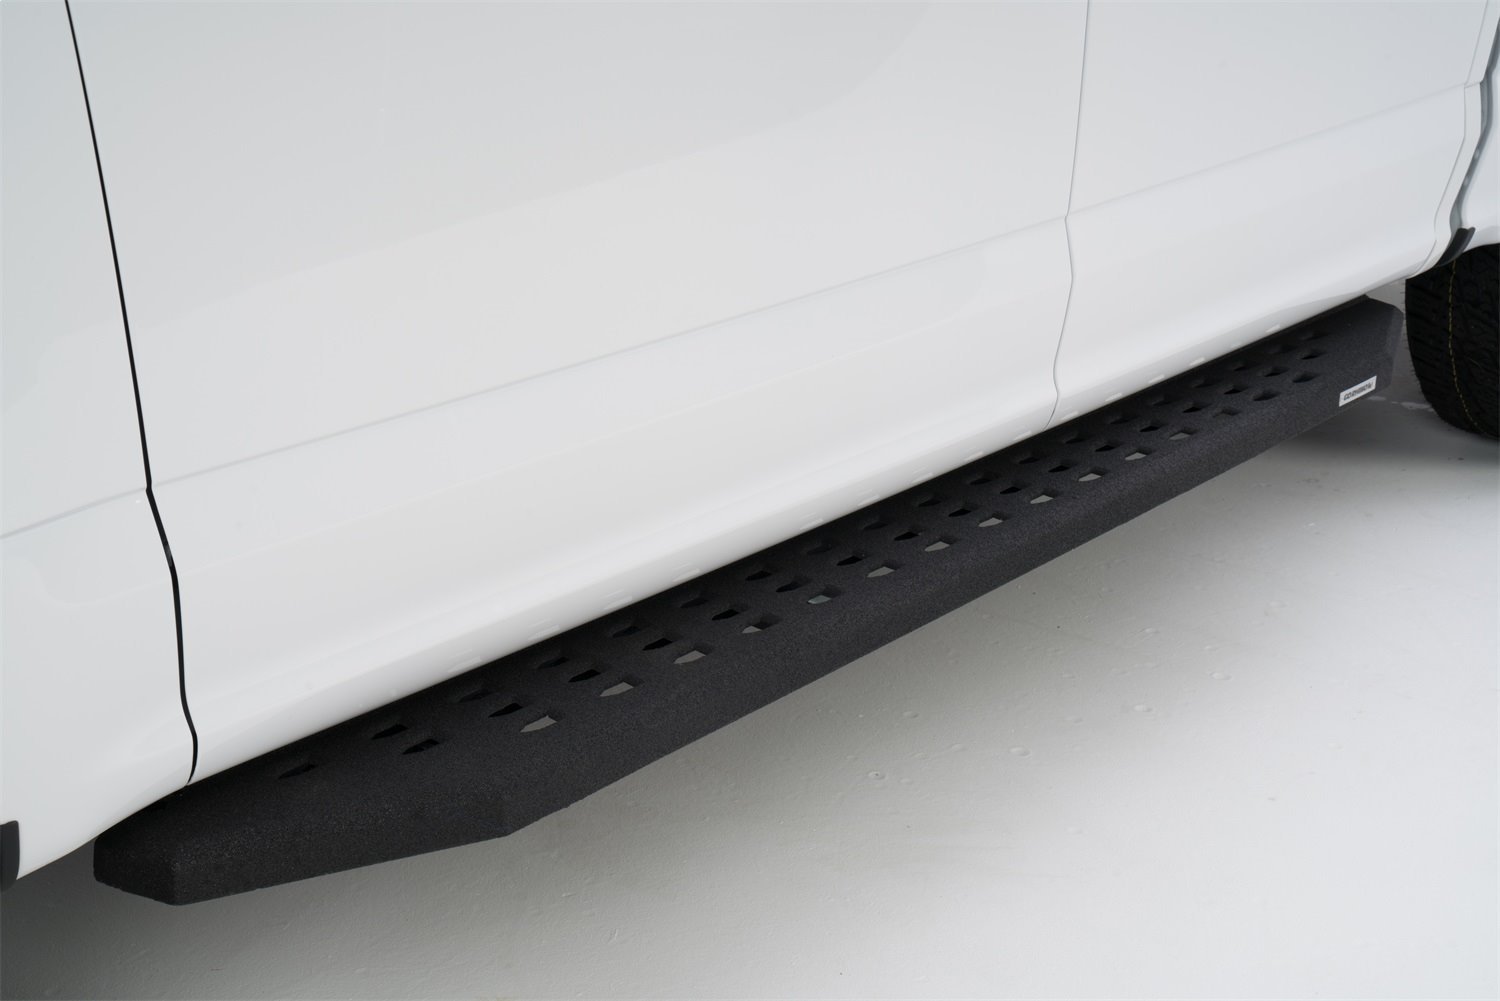 RB20 Running boards for 2007-2017 Jeep Wrangler Unlimited